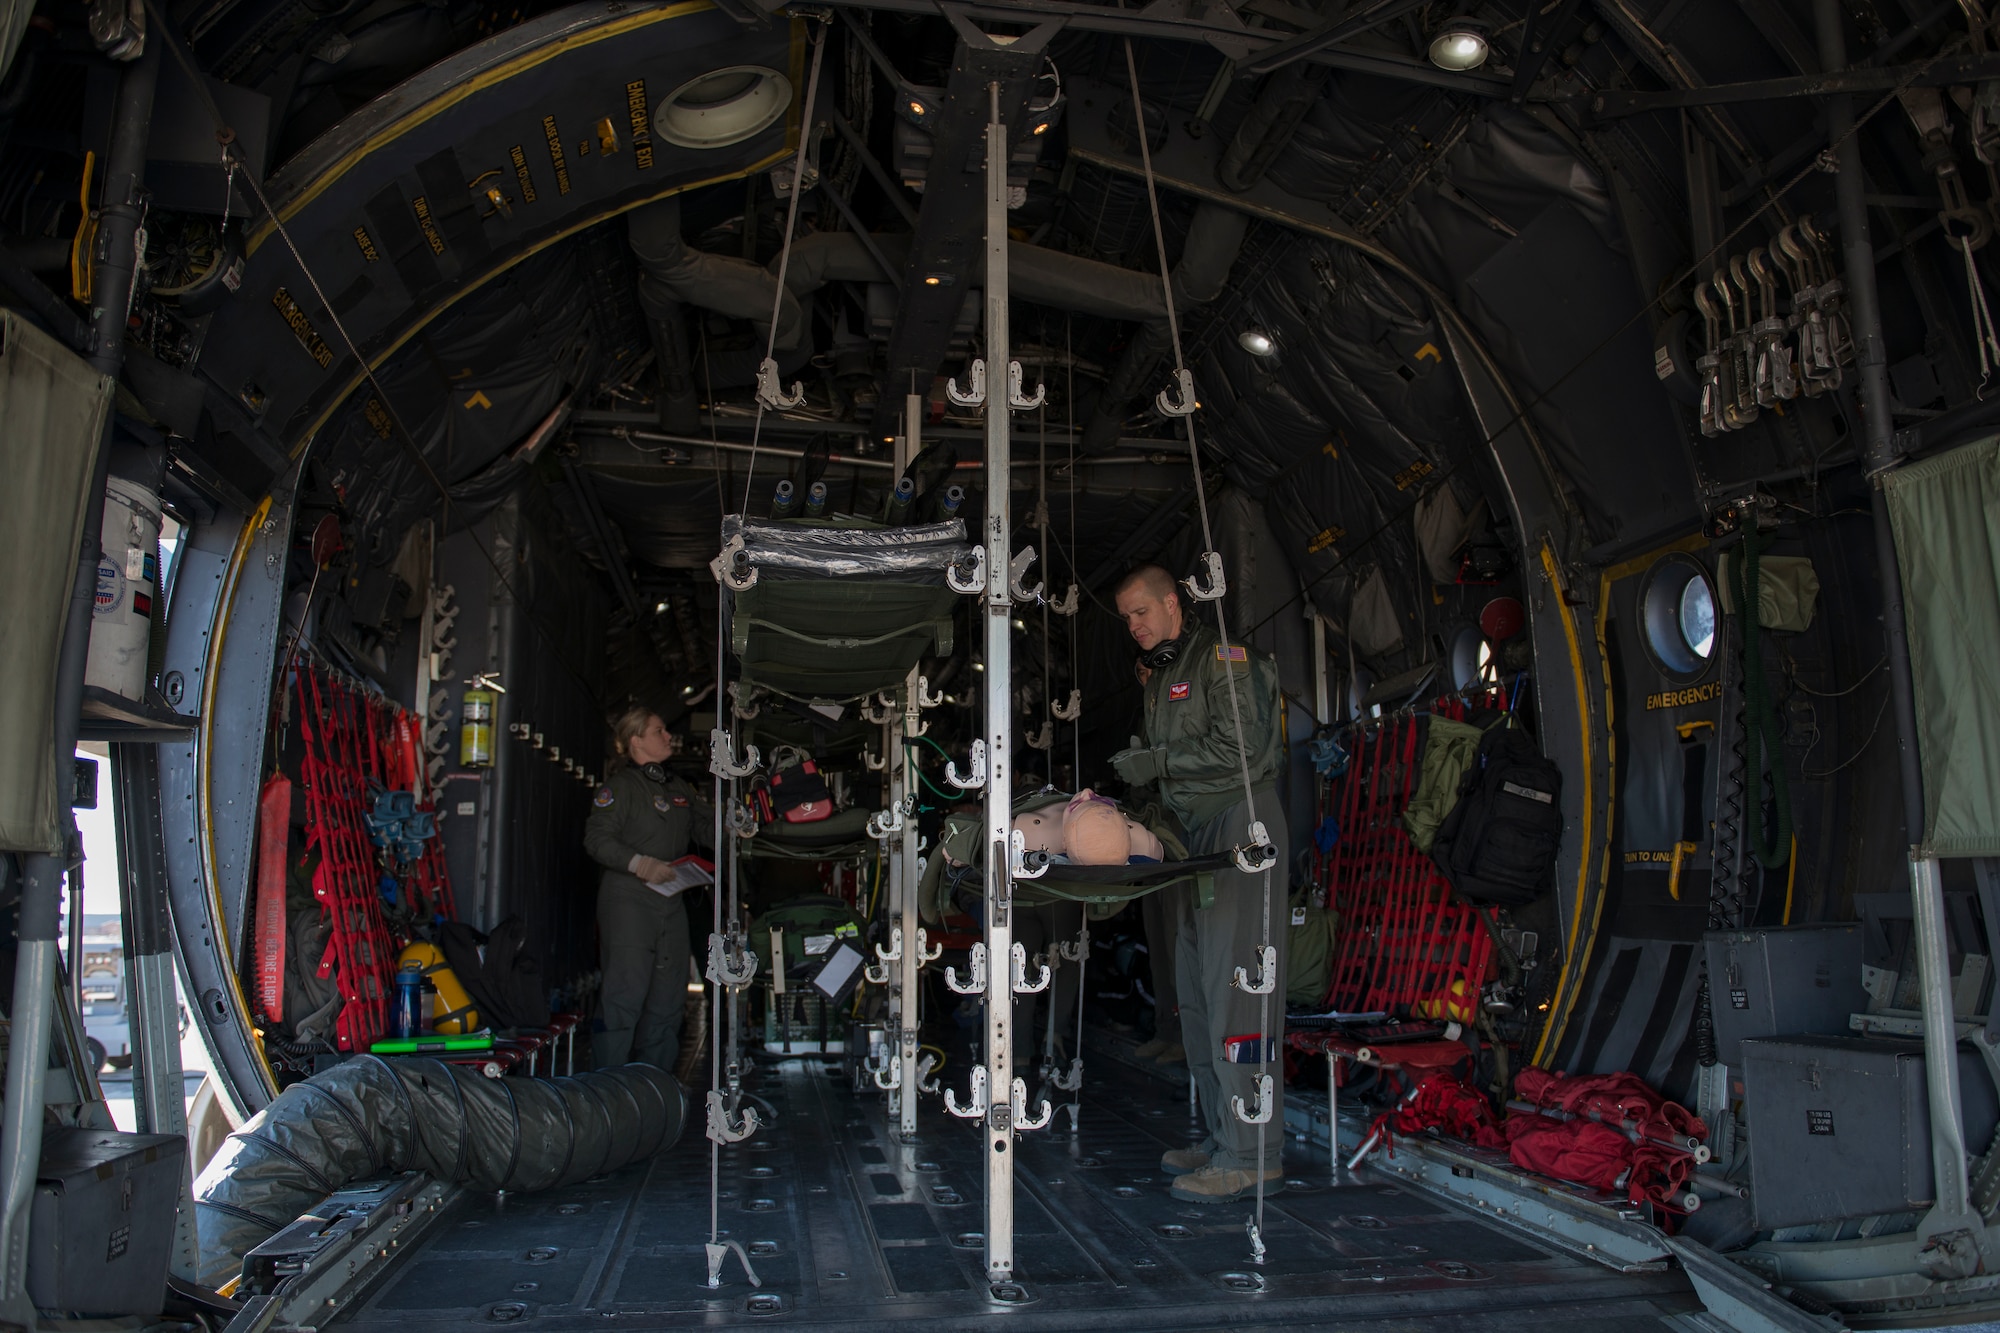 375th Aeromedical Evacuation Squadron Airmen conduct medical and operational training in a simulated C-130 Hercules fuselage Jan. 28, 2016, Scott Air Force Base, Illinois. The C-130 Hercules fuselage was rescued from the bone yard and is used to keep the aircrew's skills sharp. (U.S. Air Force photo by Airman 1st Class Melissa Estevez)